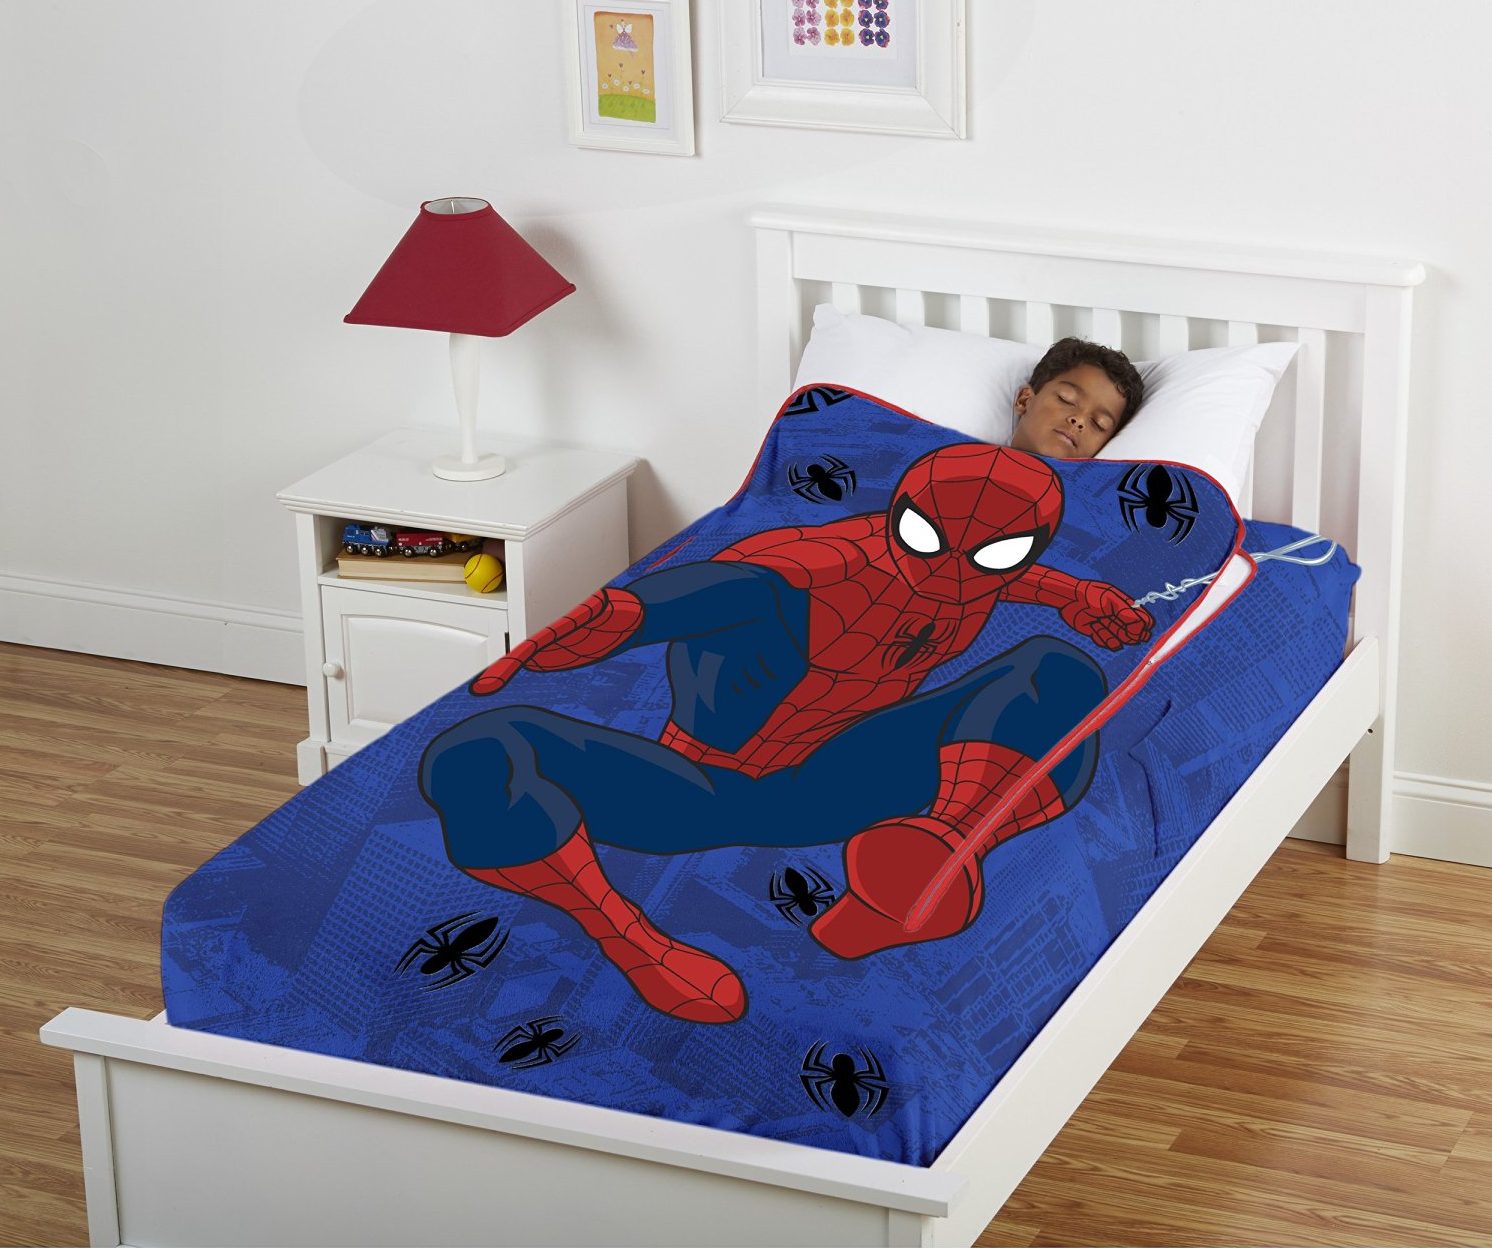 #toys #SpiderMan #JFSHome #ad